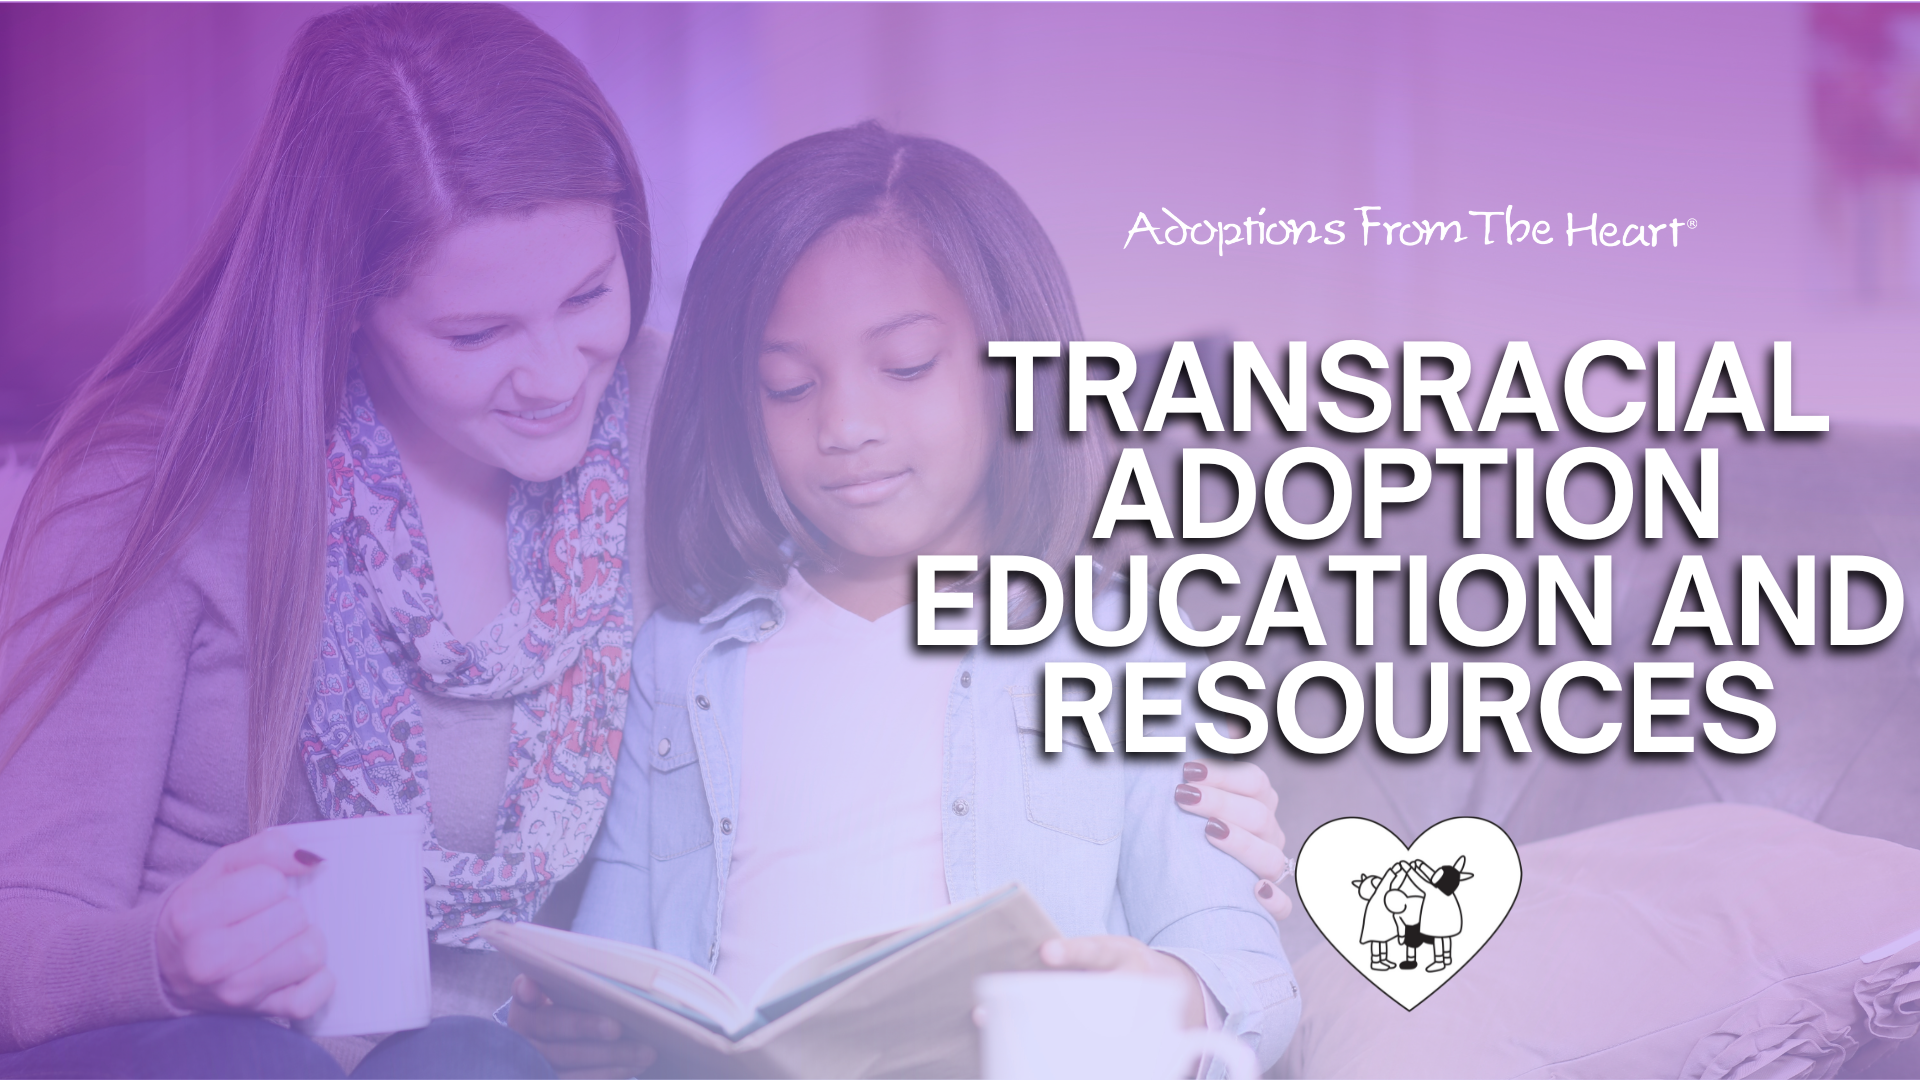 Transracial Adoption Education and Resources